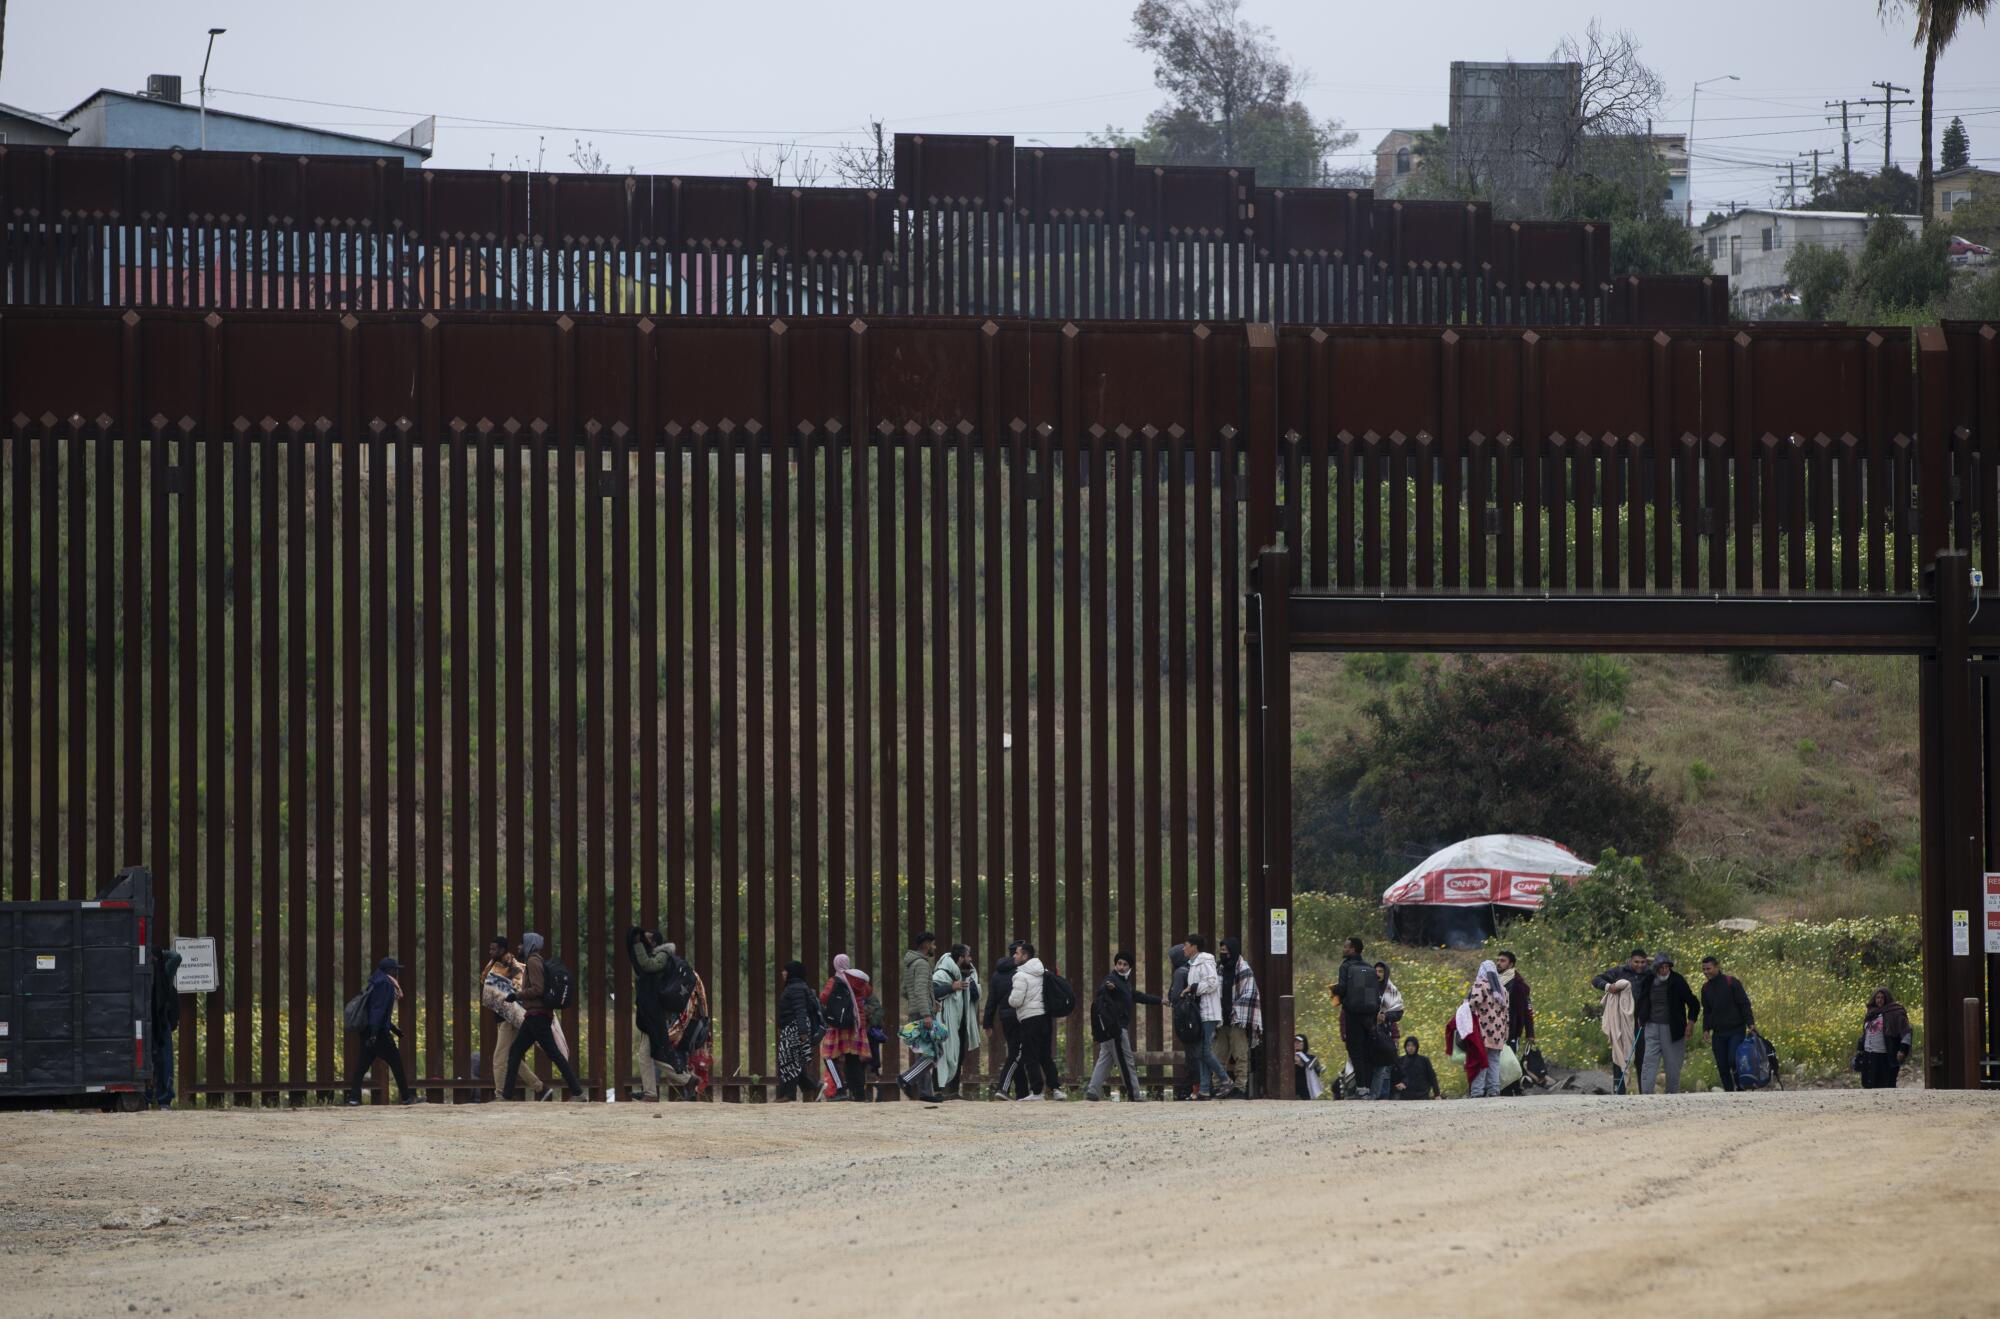 Dozens of asylum-seeking migrants run out of an open gate before being stopped by U.S. Border Patrol agents.